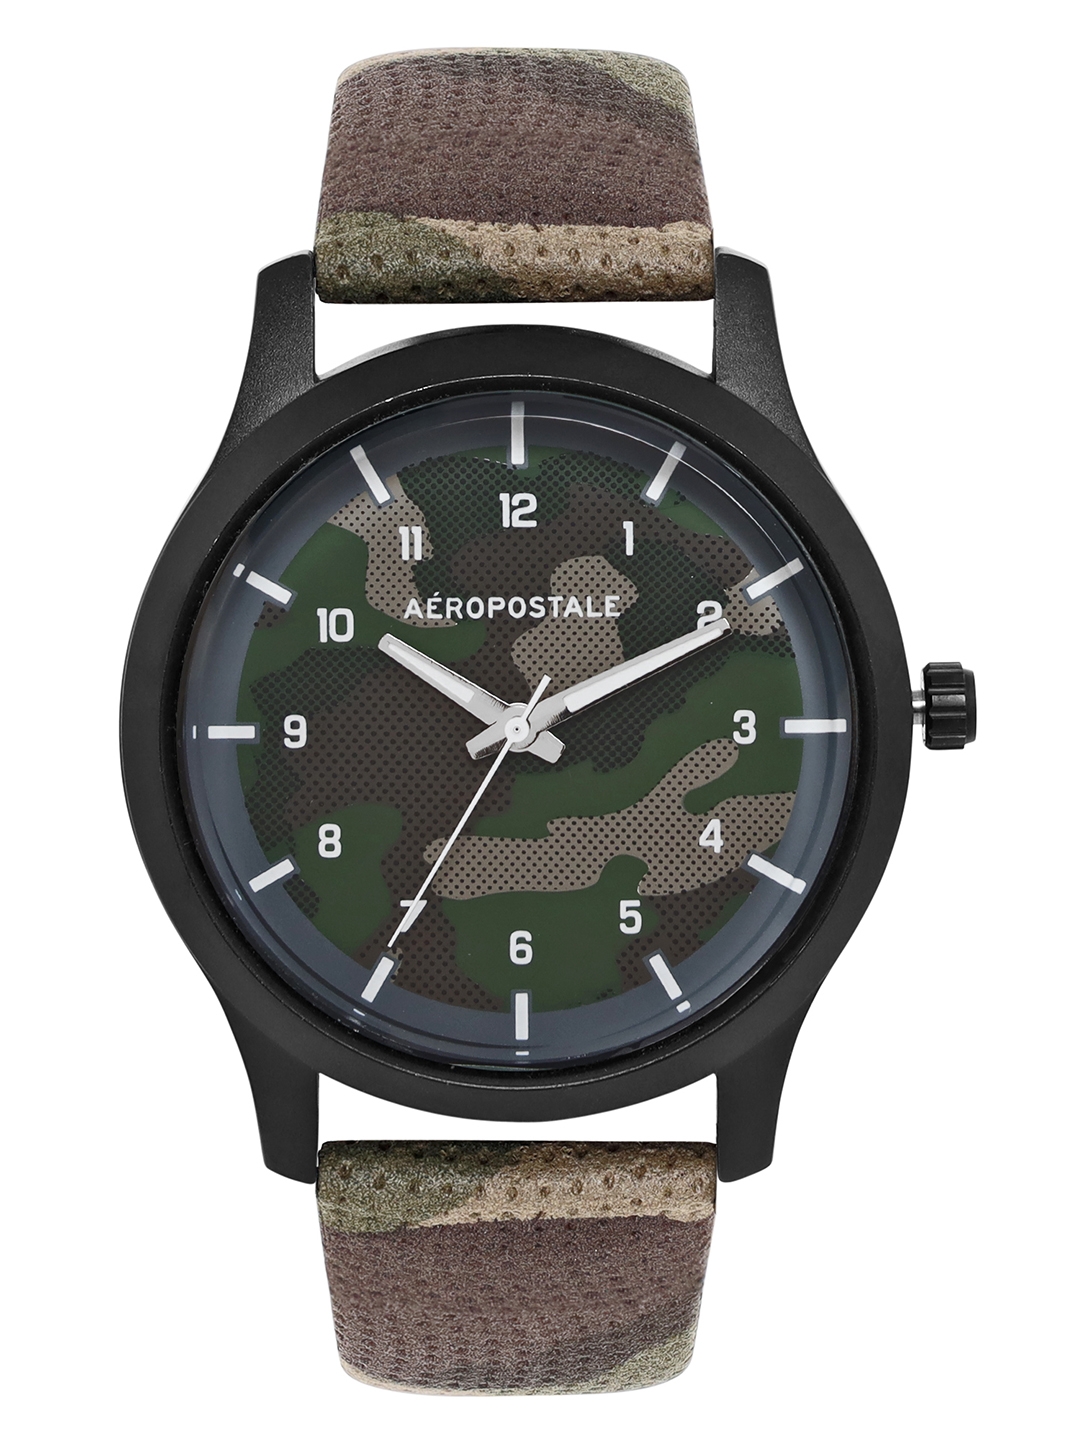 Aeropostale | Aeropostale "AERO_AW_A7-1_GRN" Classic Men’s Analog Quartz Wrist Watch, Black Metal Alloy case, Classic Green camouflage Dial with contrasting white hand, Leather  wrist Band  Water resistant 3.0 ATM.